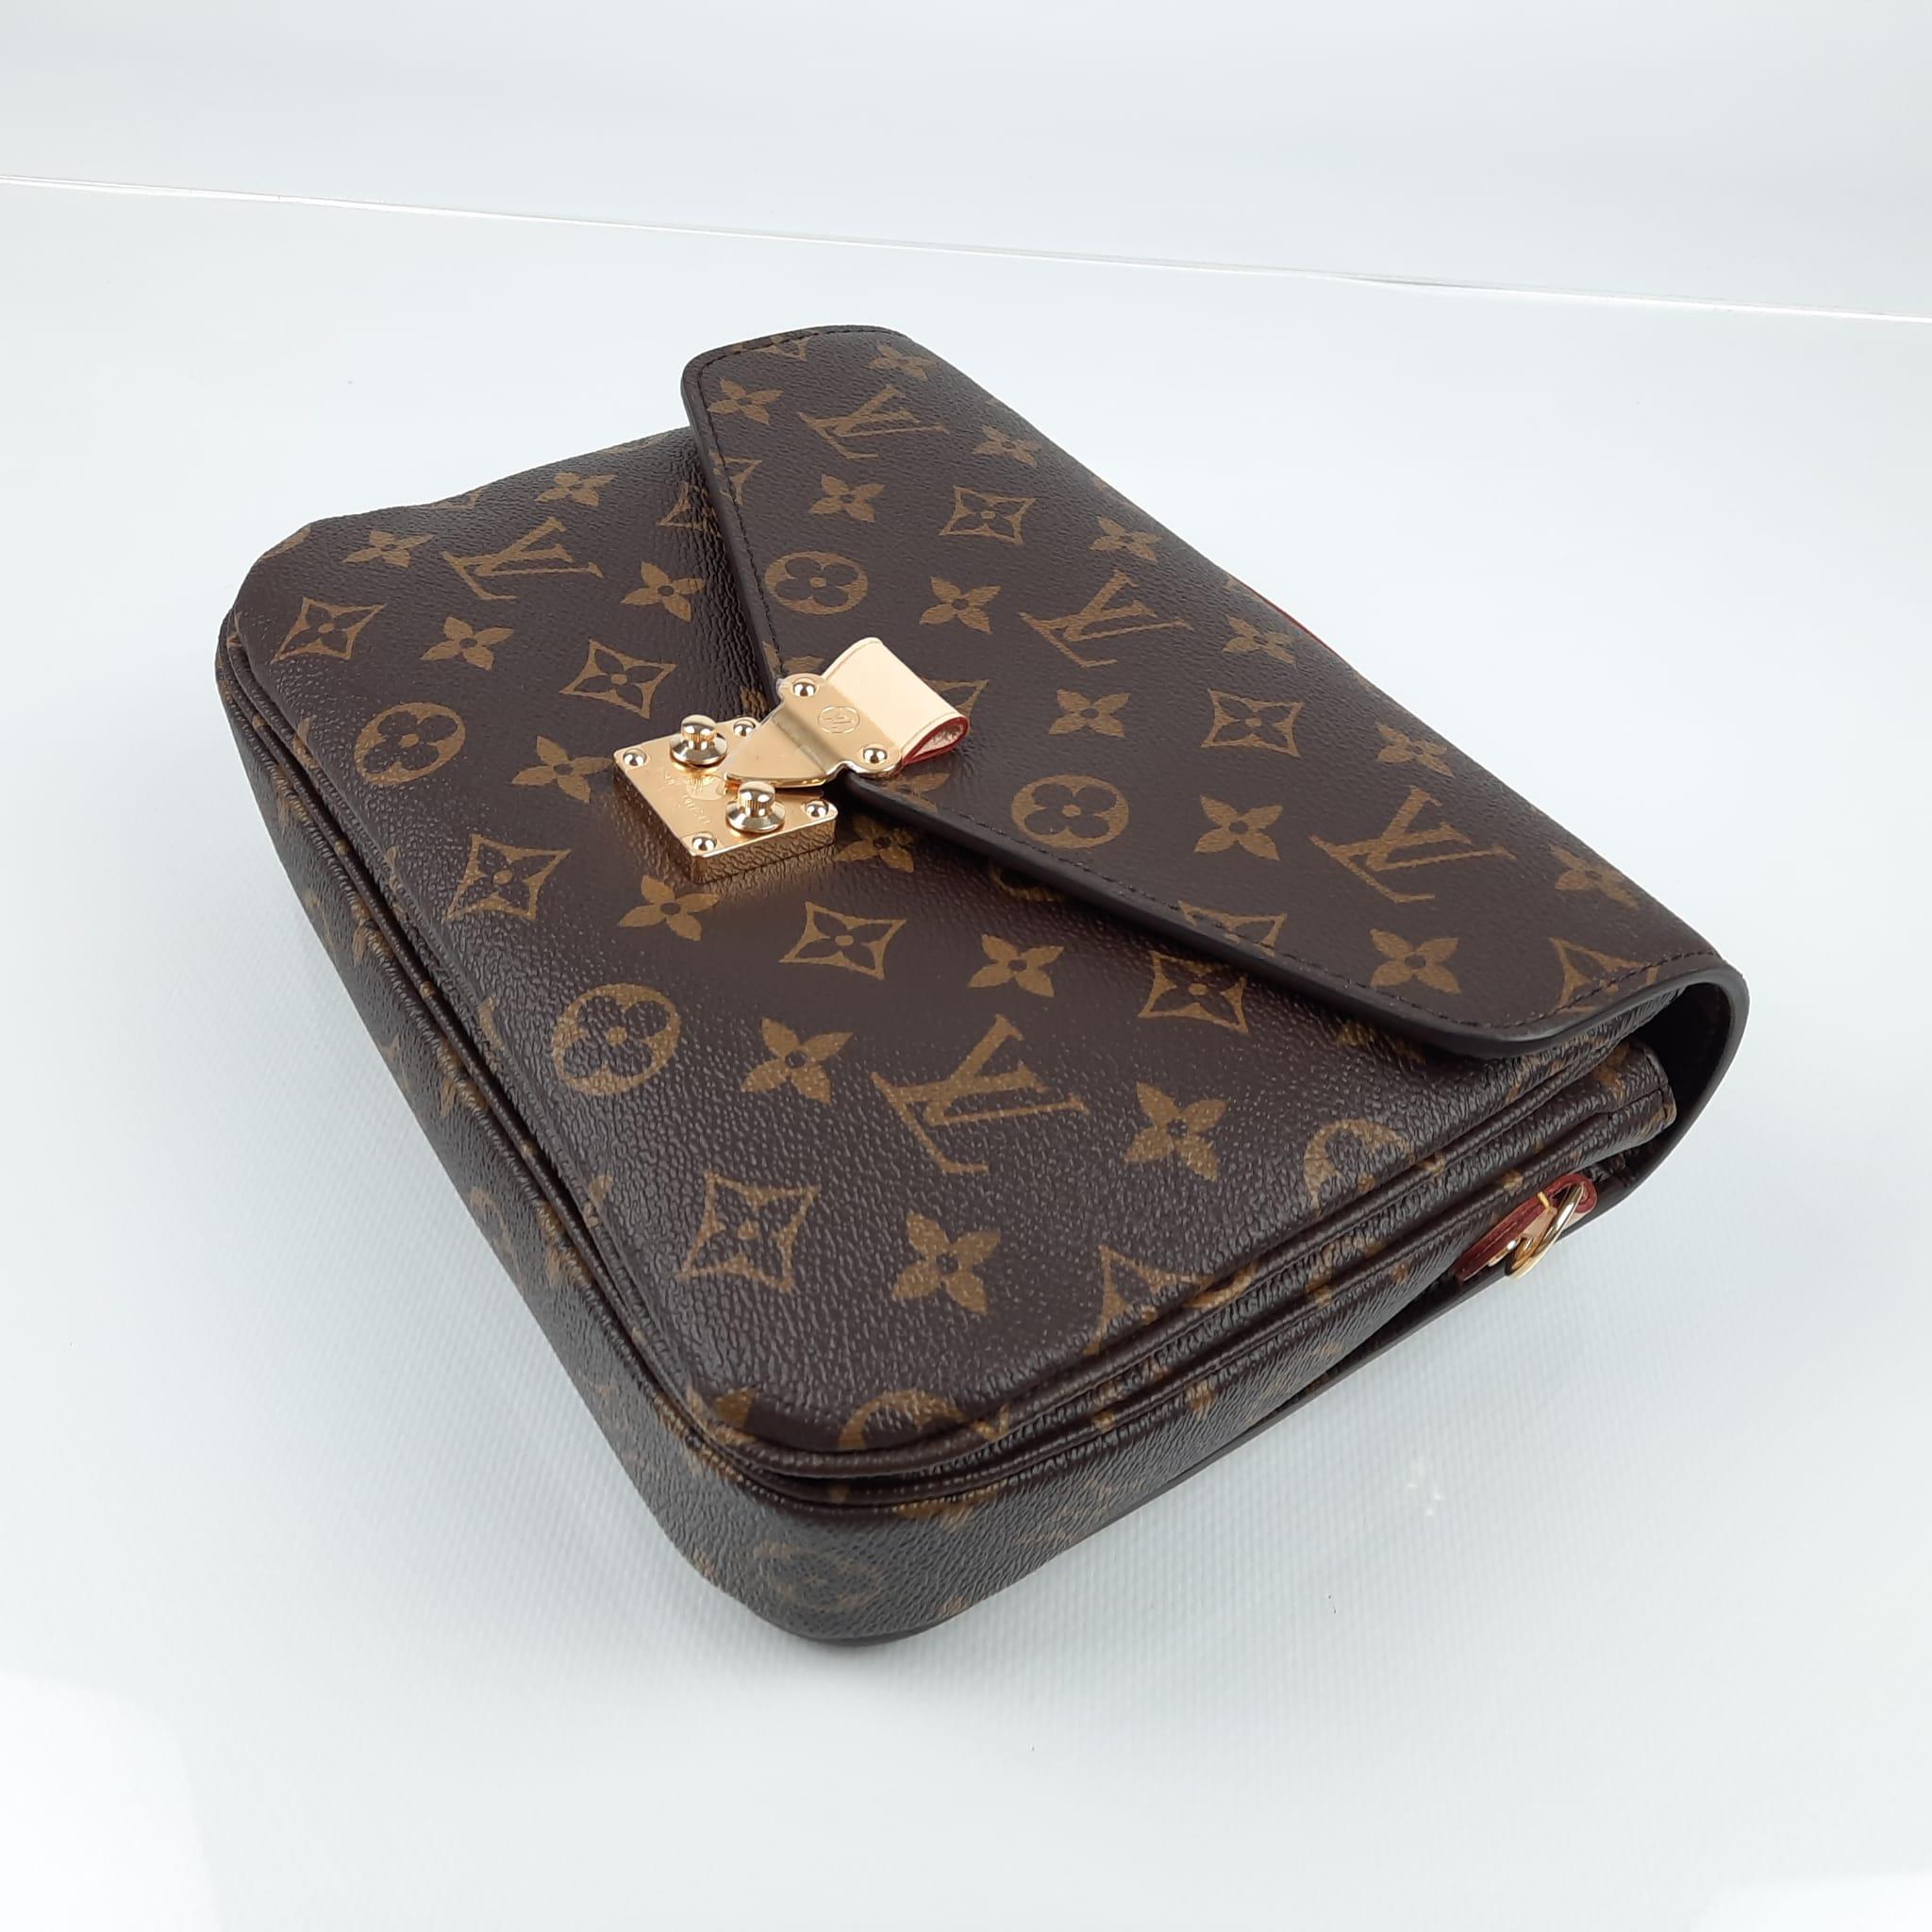 Elegance is personified in the petite shape of the Pochette Métis. Made of supple Monogram canvas, its compact dimensions open up to reveal many useful pockets and compartments.